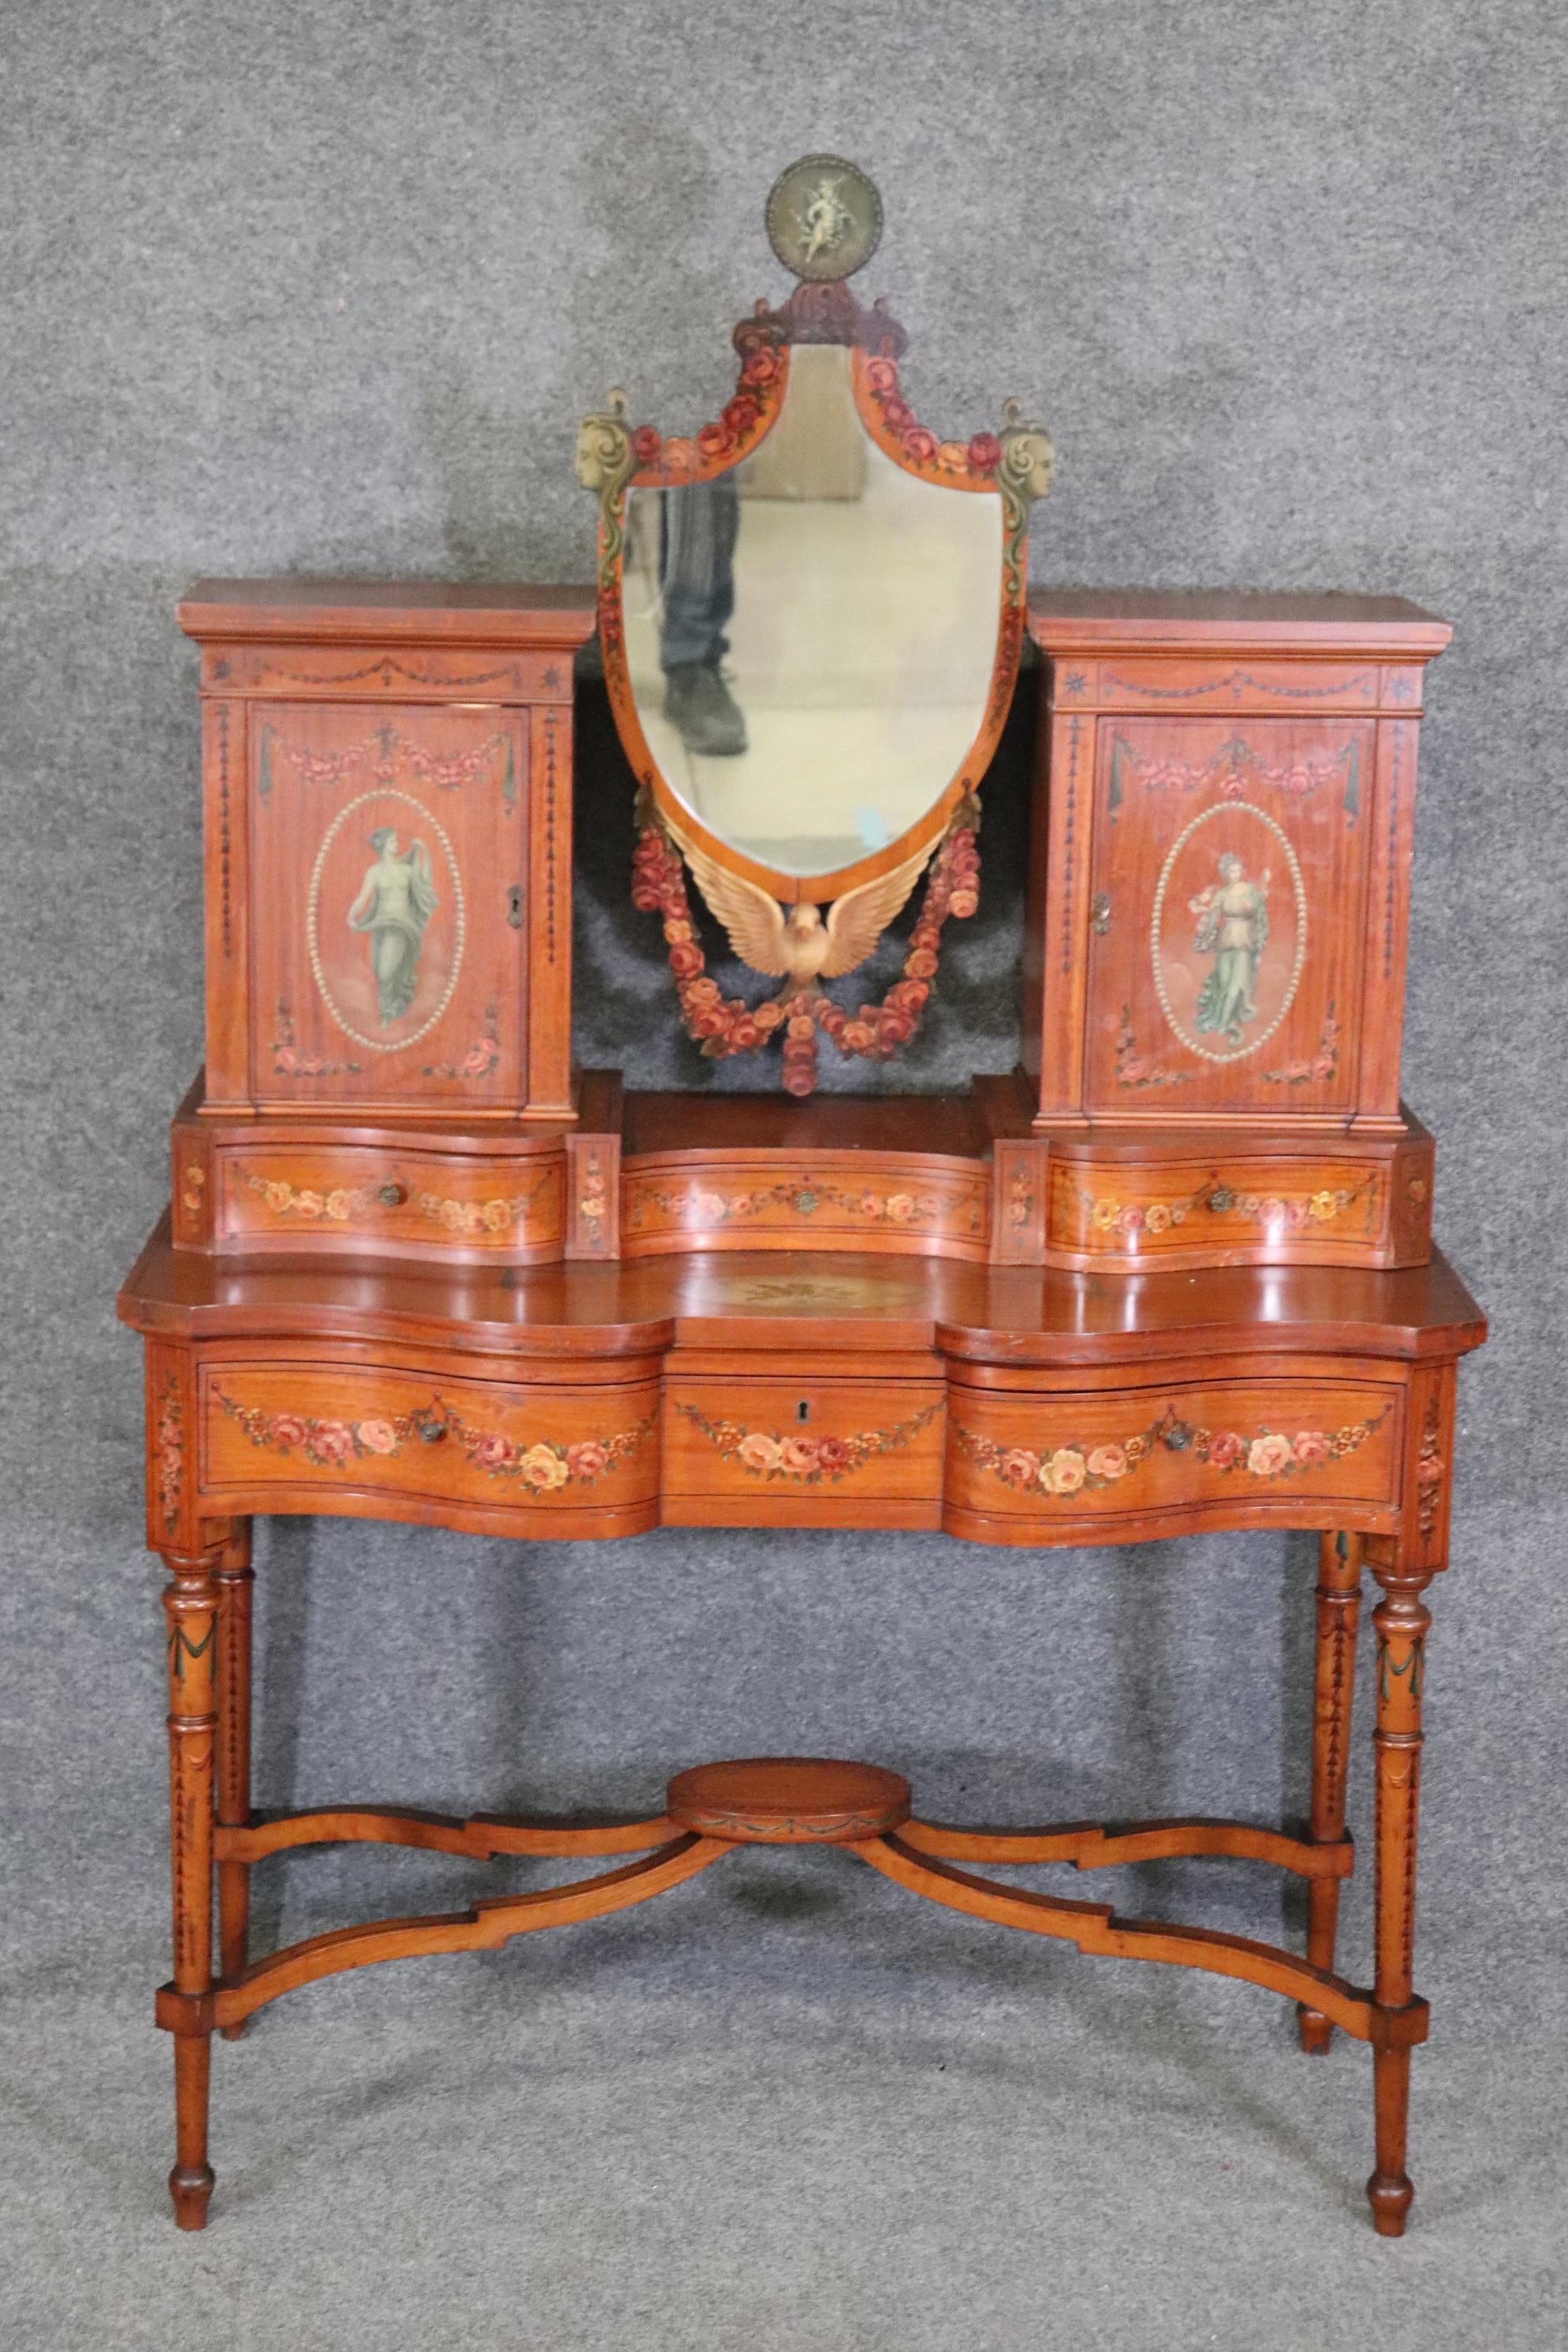 English Fine Quality Gillow & Co Satinwood Paint Decorated Ladies Vanity Circa 1890s For Sale